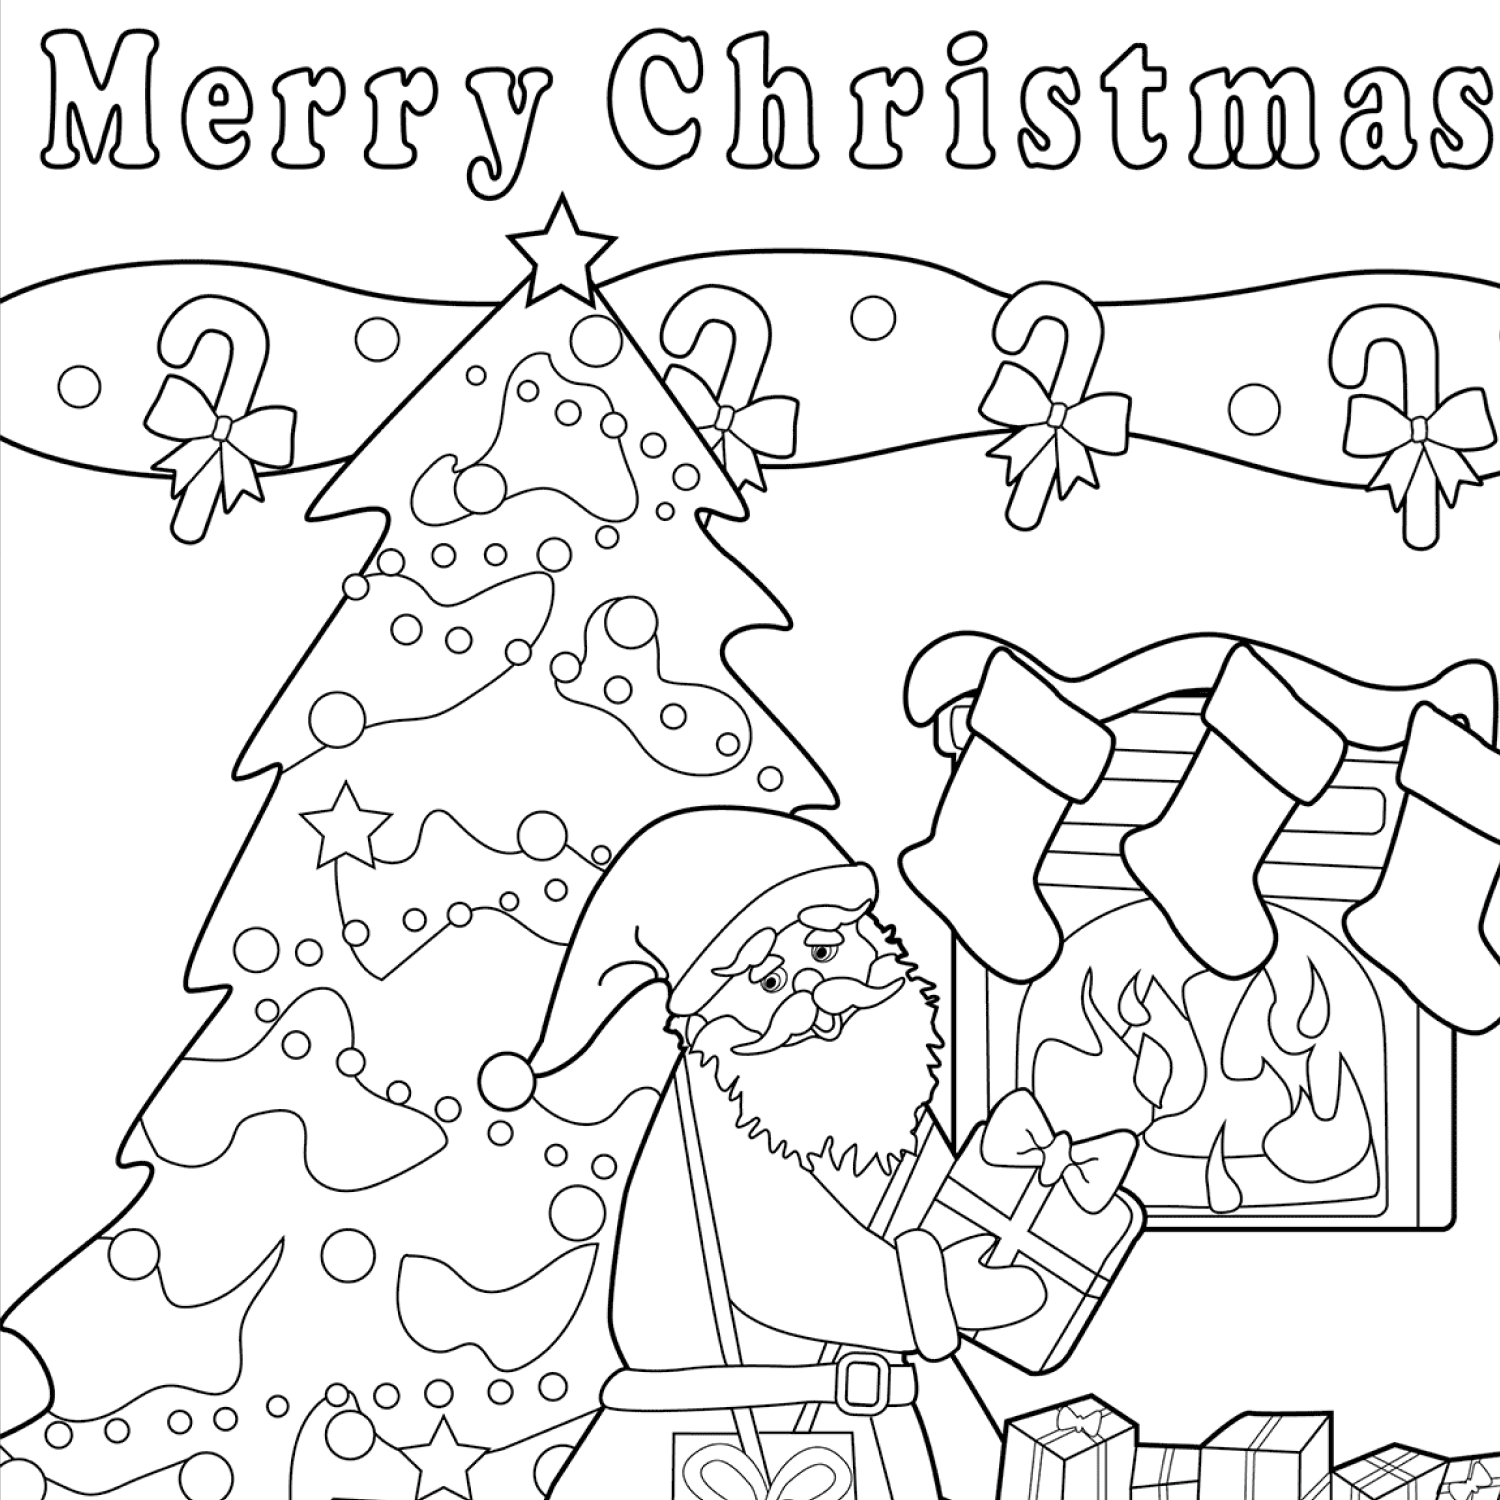 Merry christmas free coloring page â